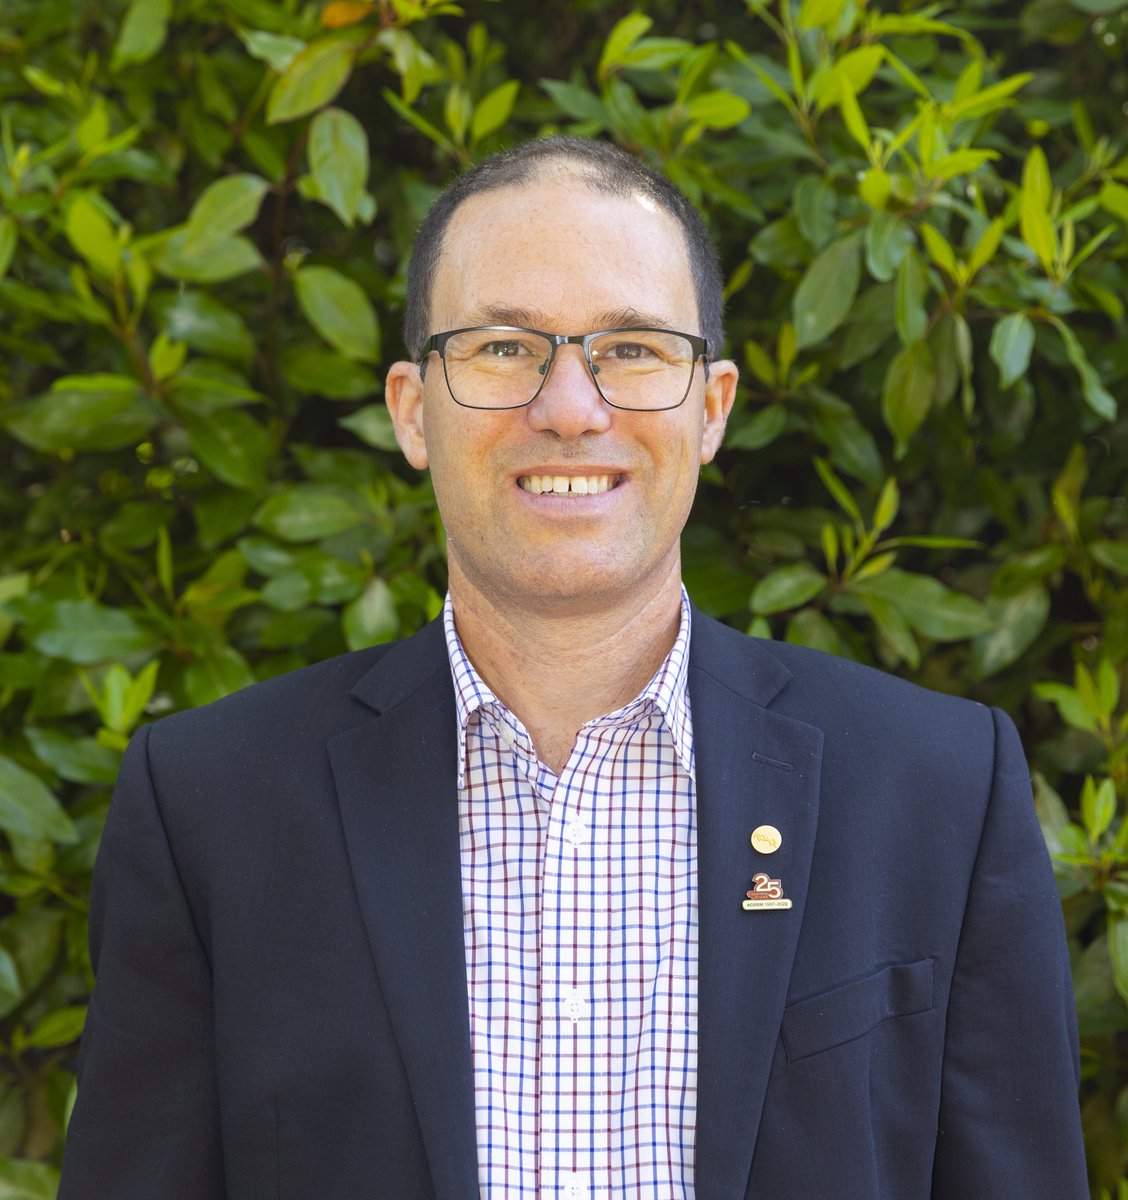 Introducing Dr Raymond ‘RT’ Lewandowski III, who will take over the reins as RDAA President next October, following his election as RDAA President-elect! RT is a Rural Generalist doctor working in Innisfail and Cairns in #FNQ. More - rdaa.com.au/documents/item… #medtwitter #auspol